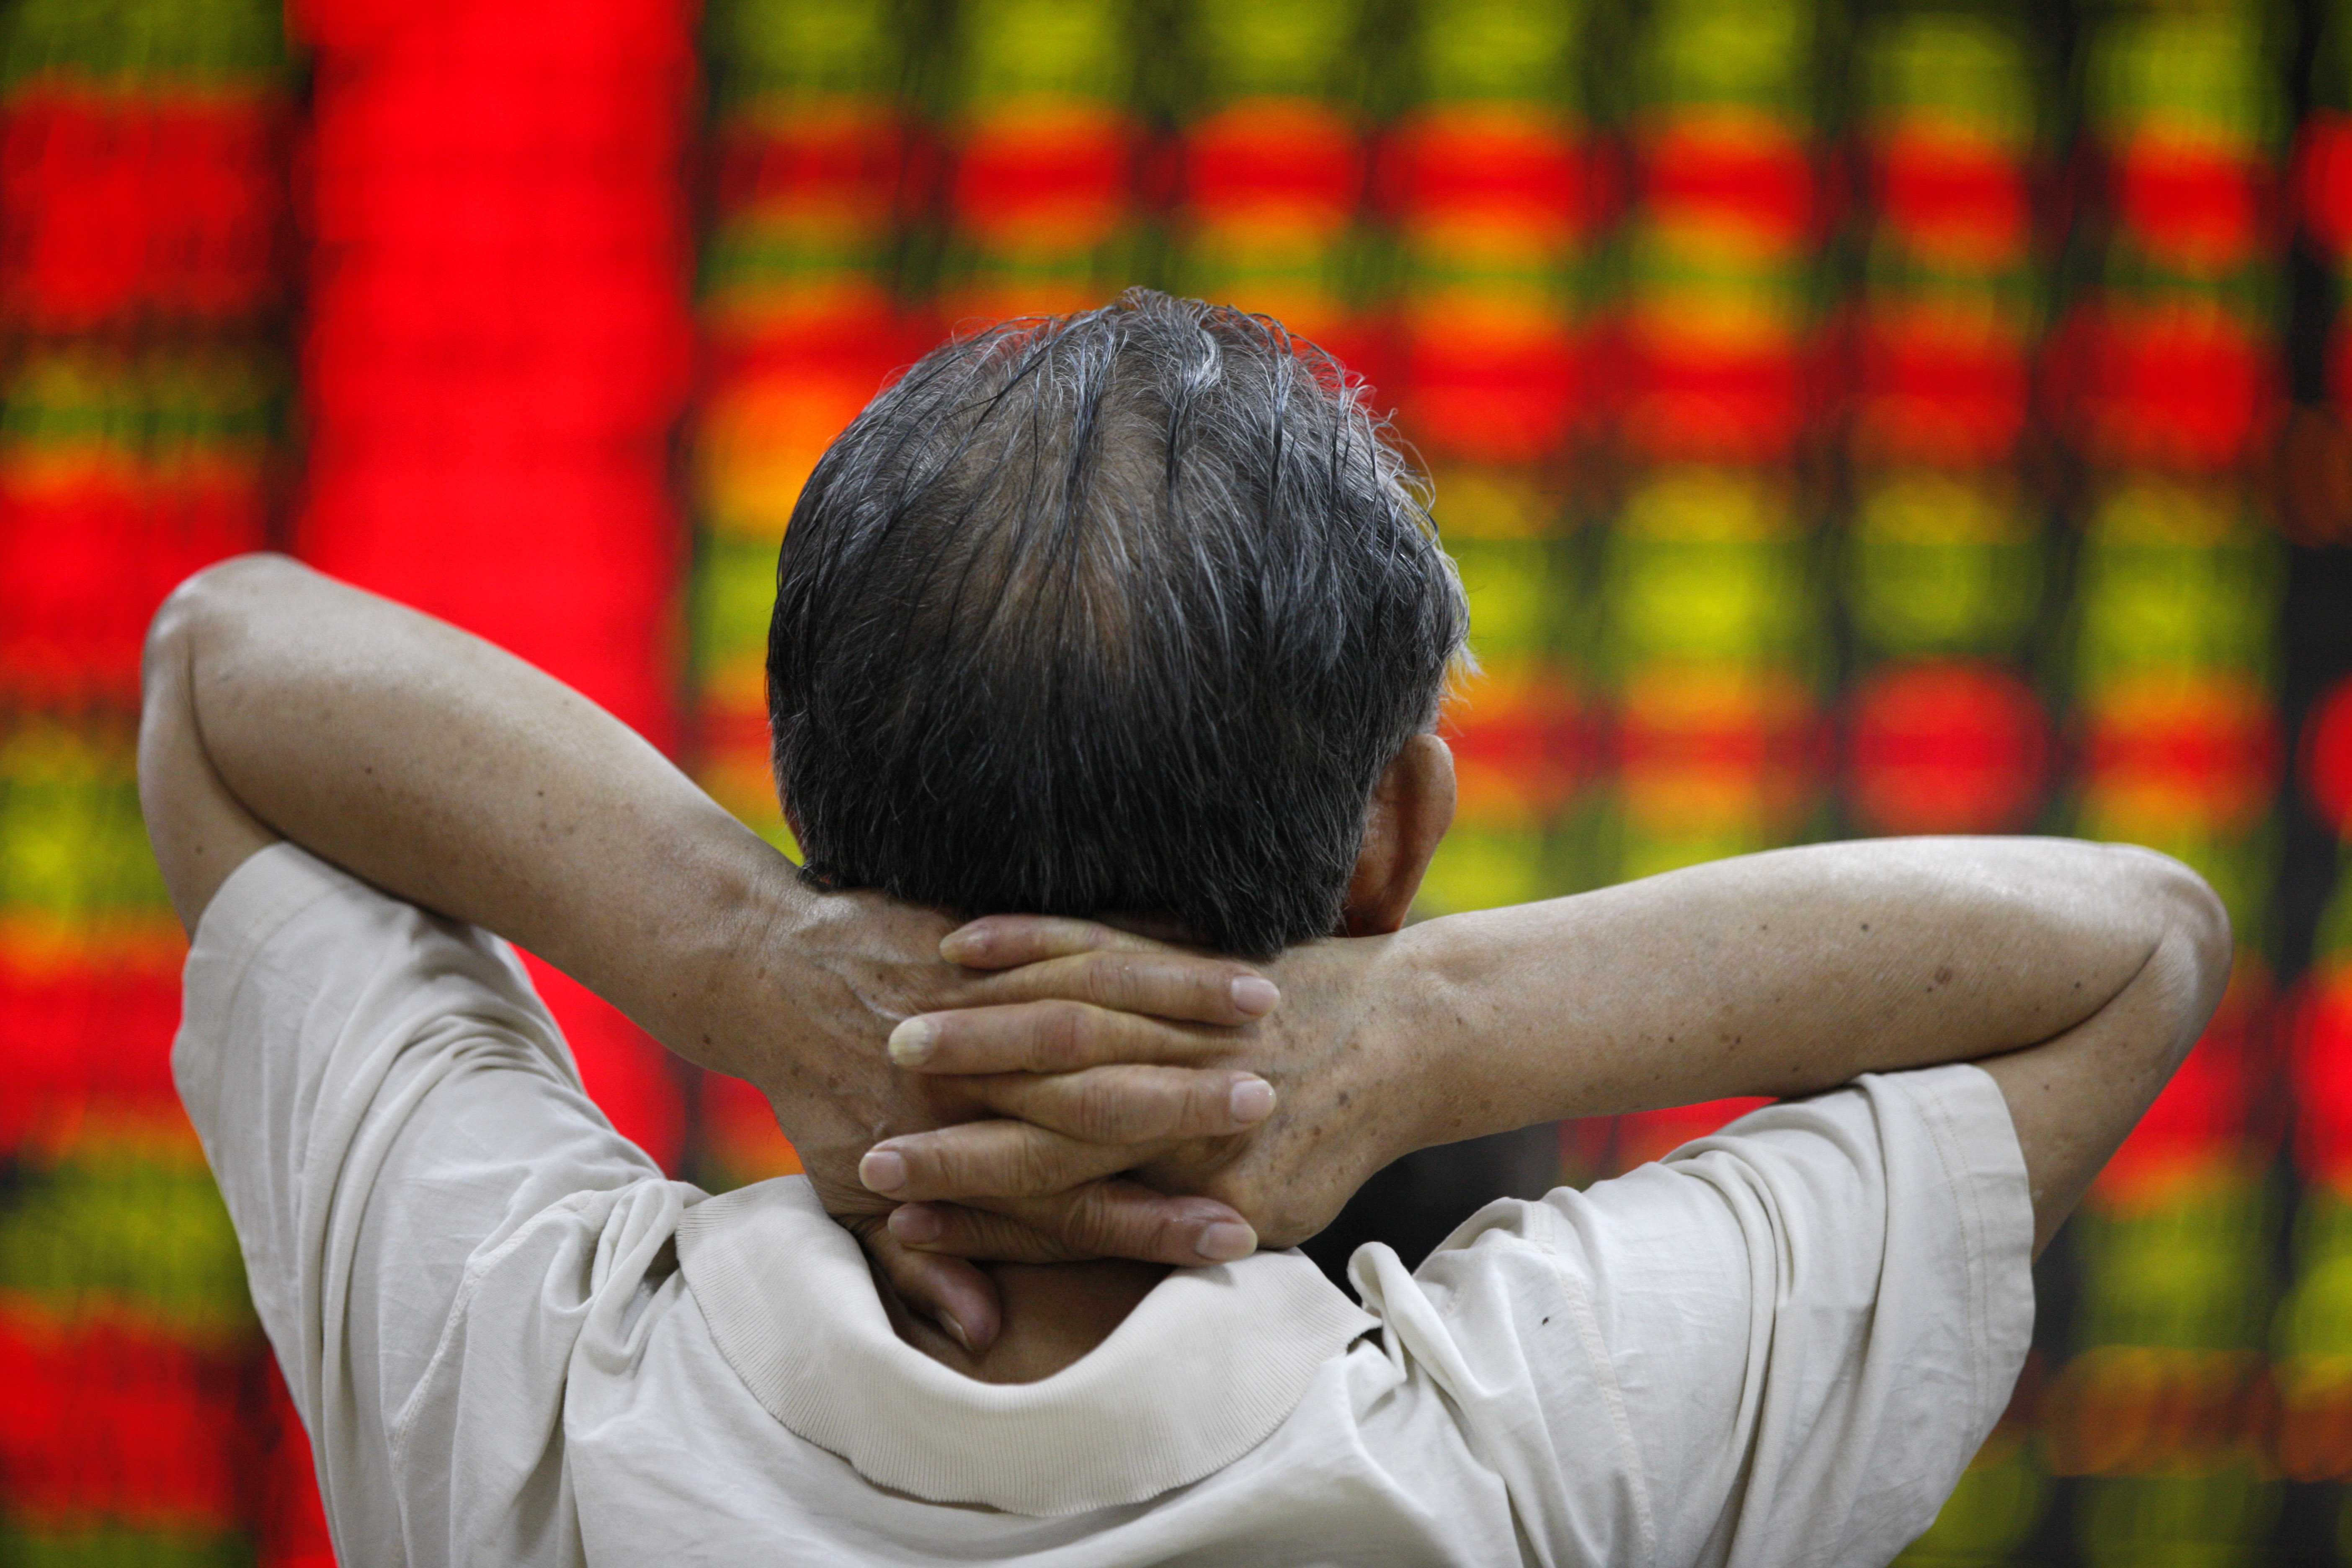 A man watches a screen board at a stocks market in Huaibei, east China's Anhui Province, July 6, 2015.